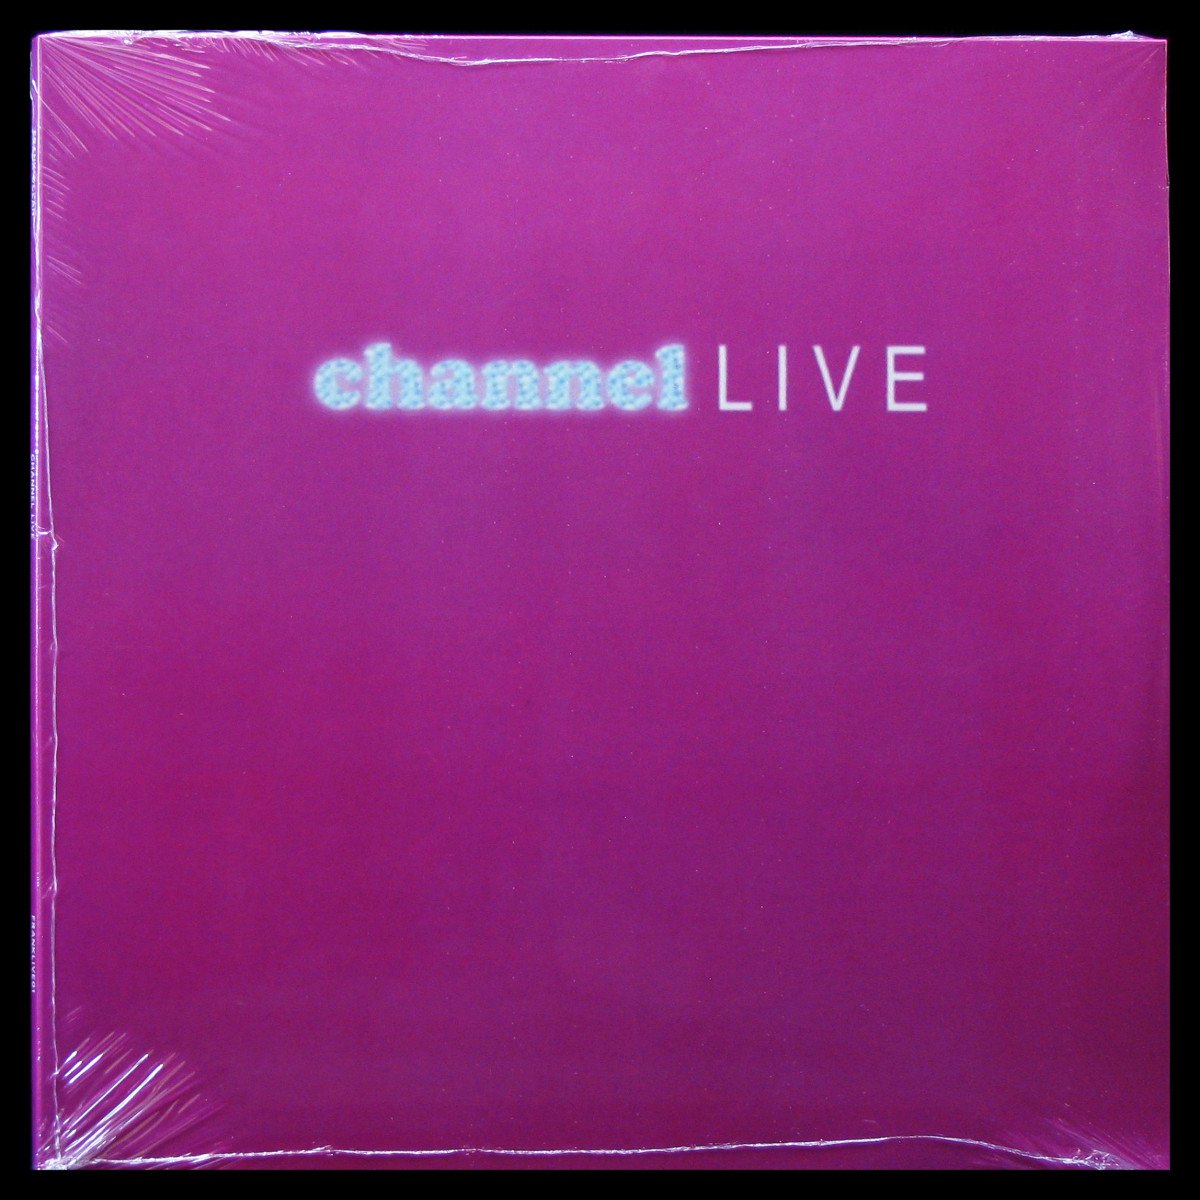 Channel Live